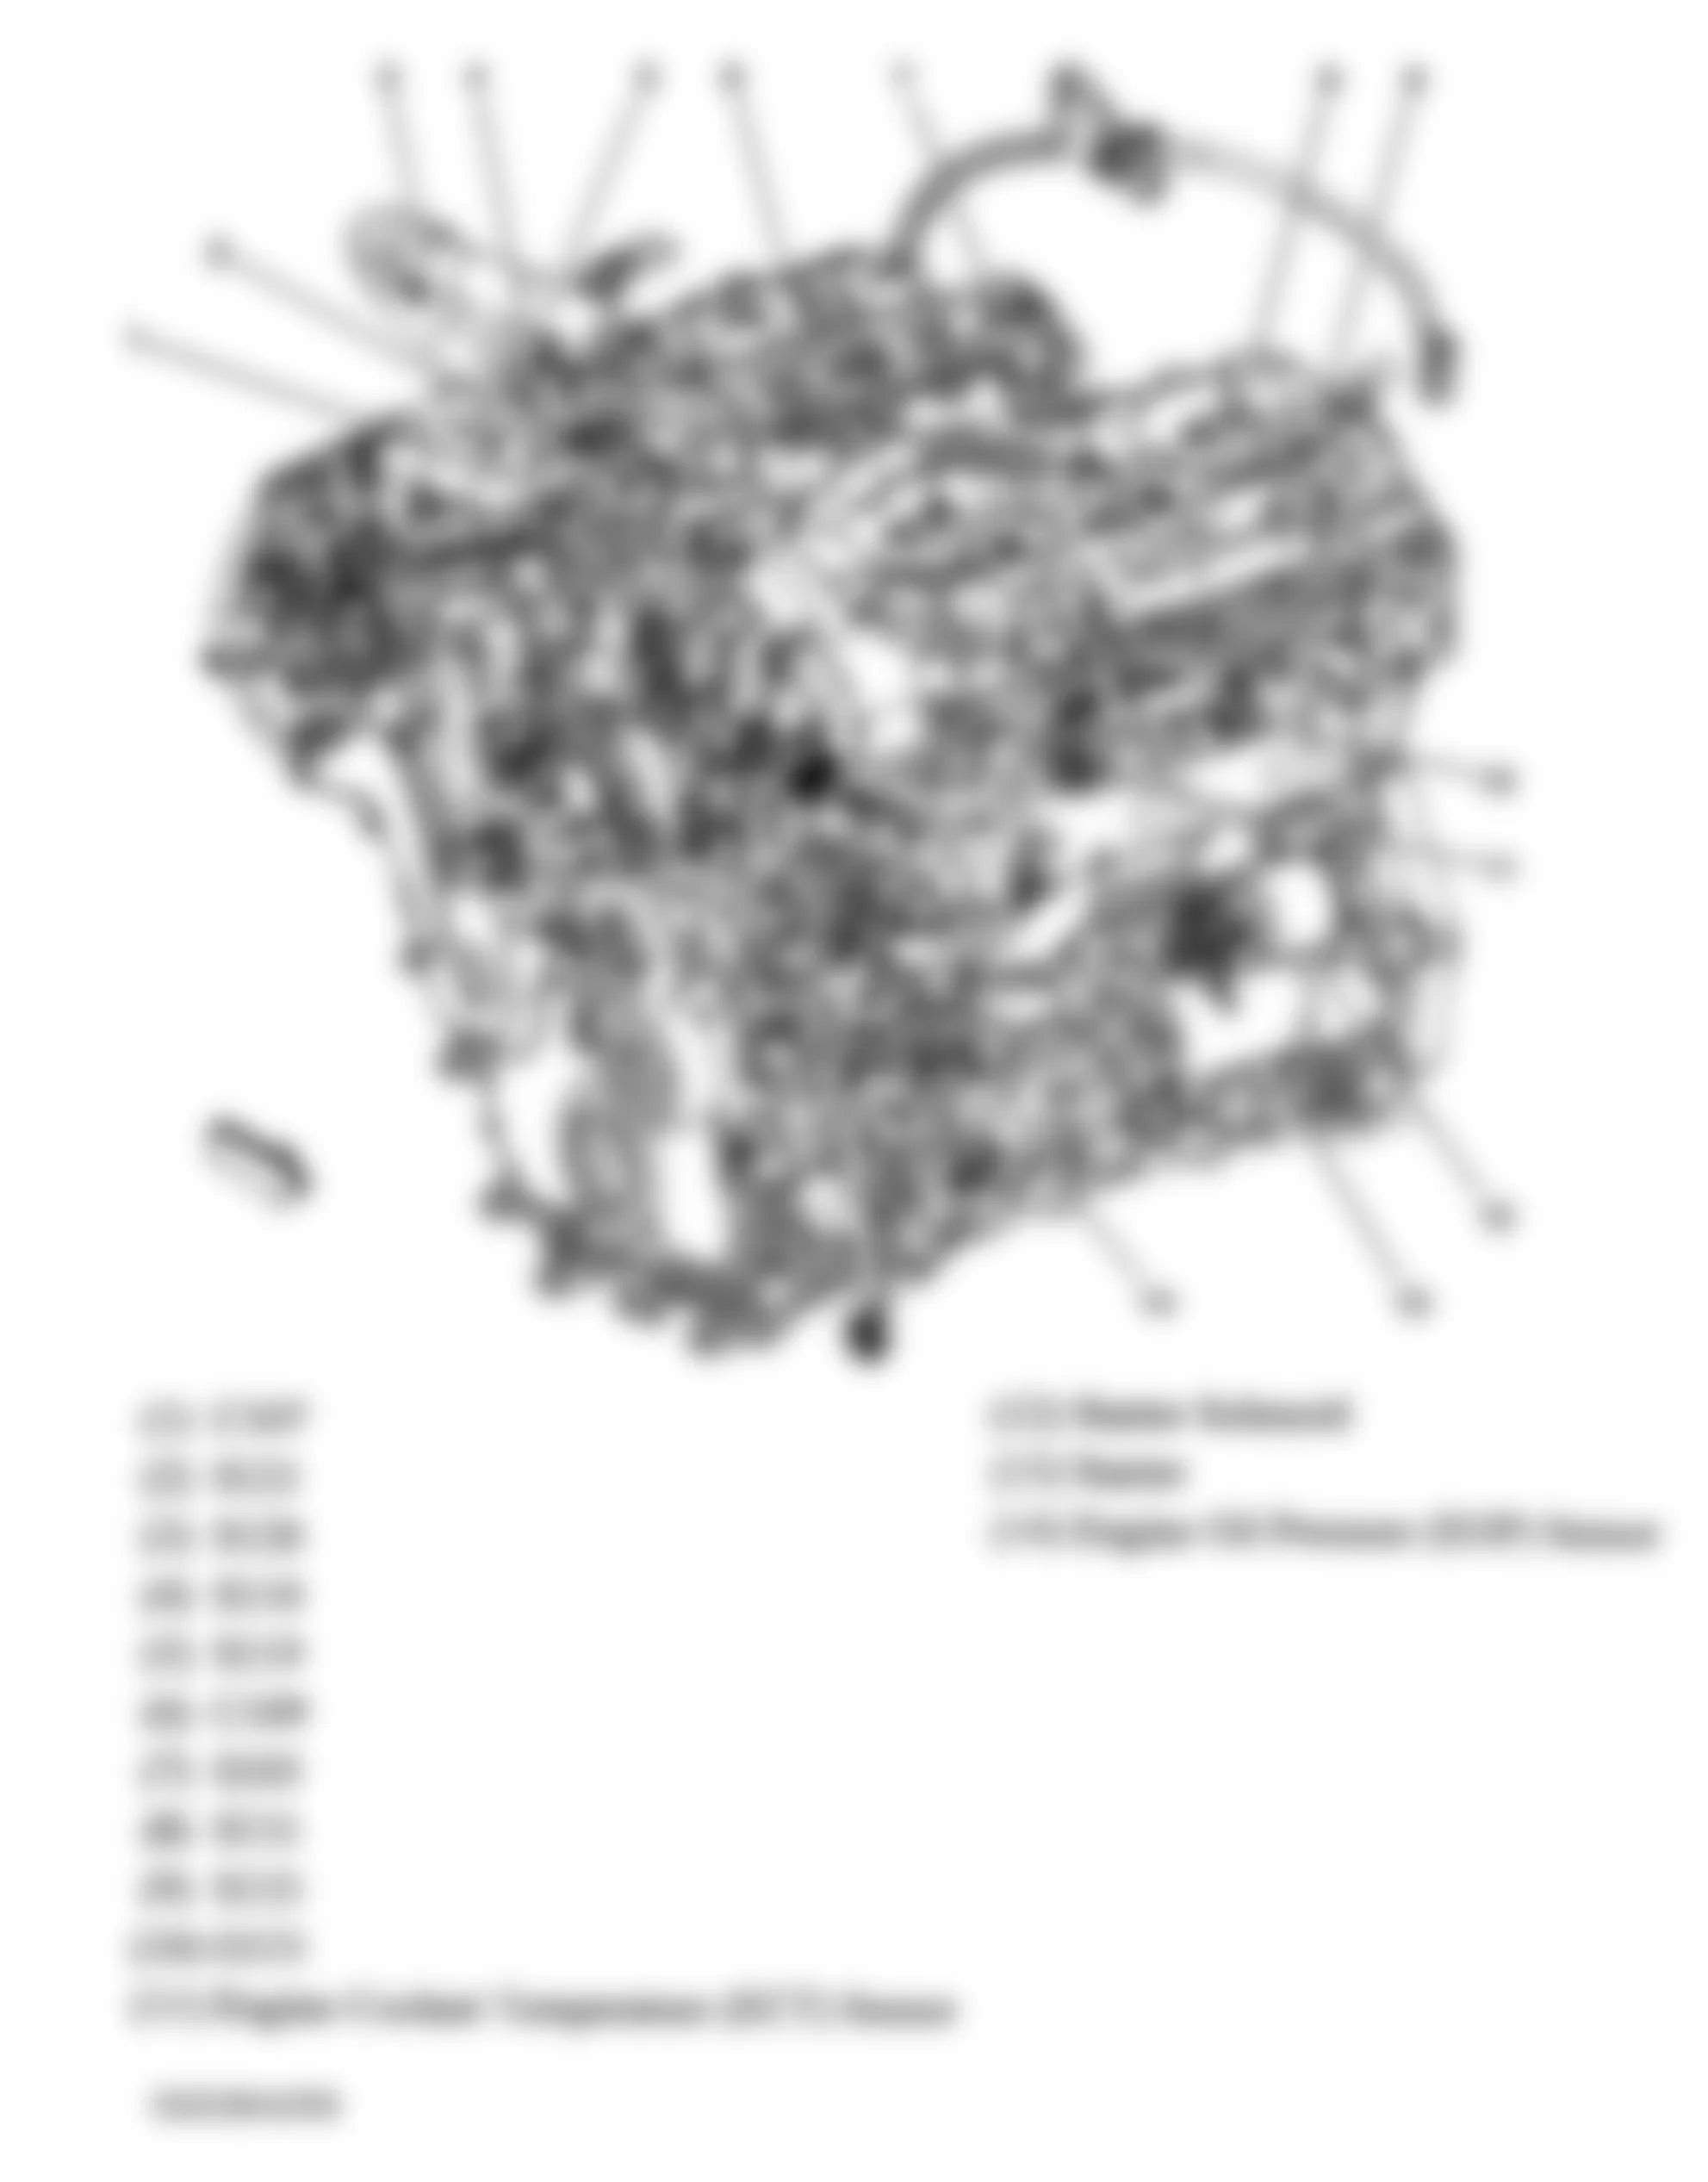 Buick Allure CXL 2005 - Component Locations -  Front Of Engine (3.6L)